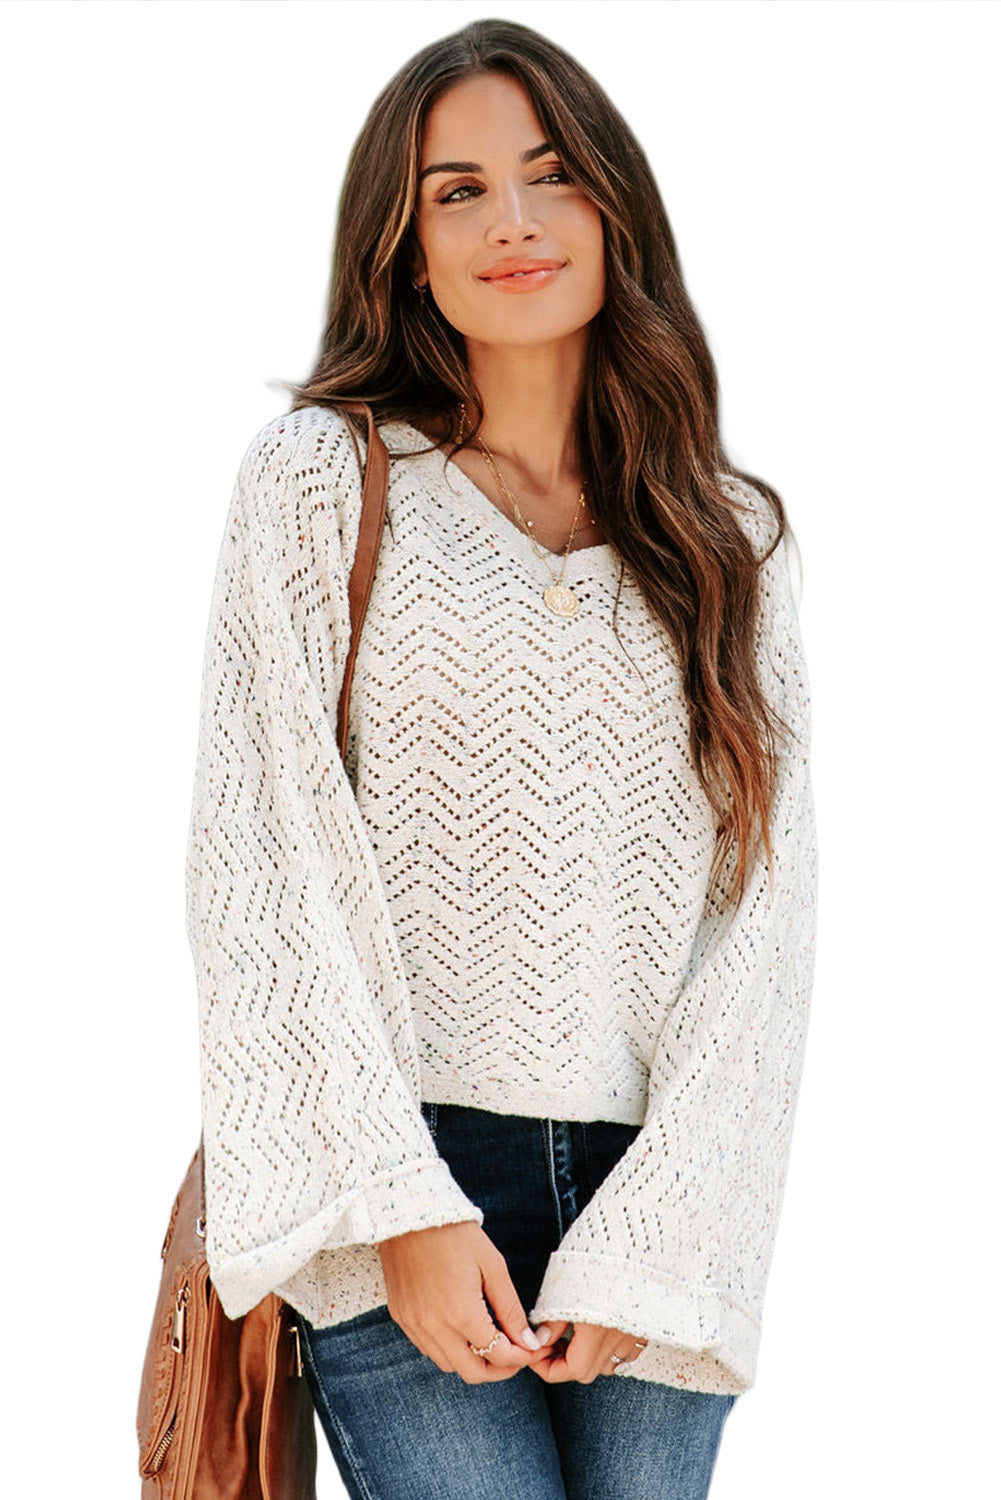 White Openwork Knit Bell Sleeve Sweater Tops & Tees JT's Designer Fashion